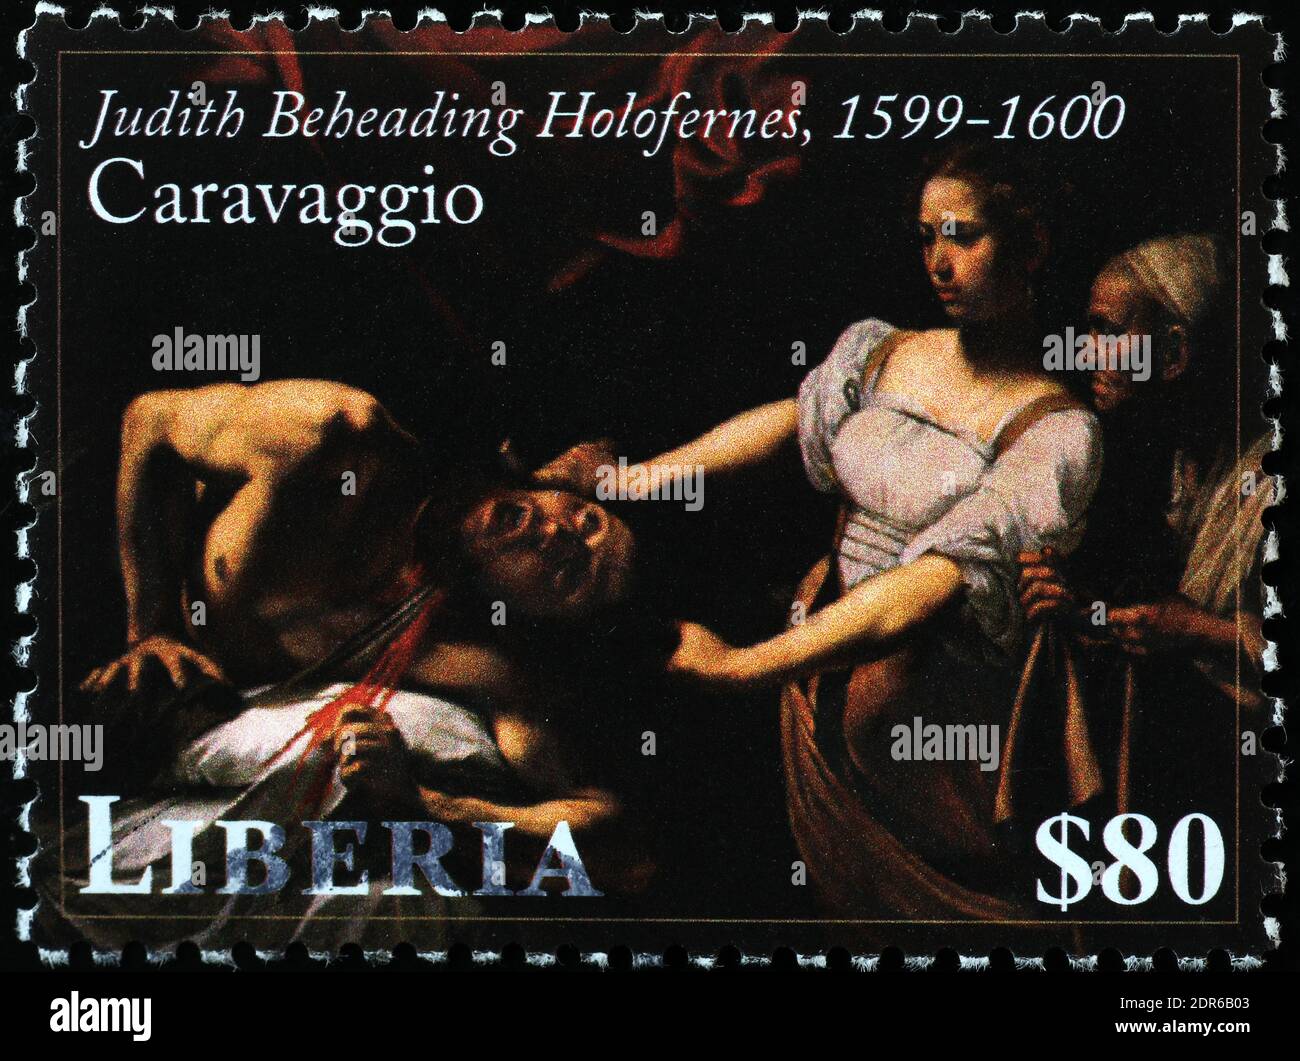 Judith beheading Holofernes by Caravaggio on postage stamp Stock Photo